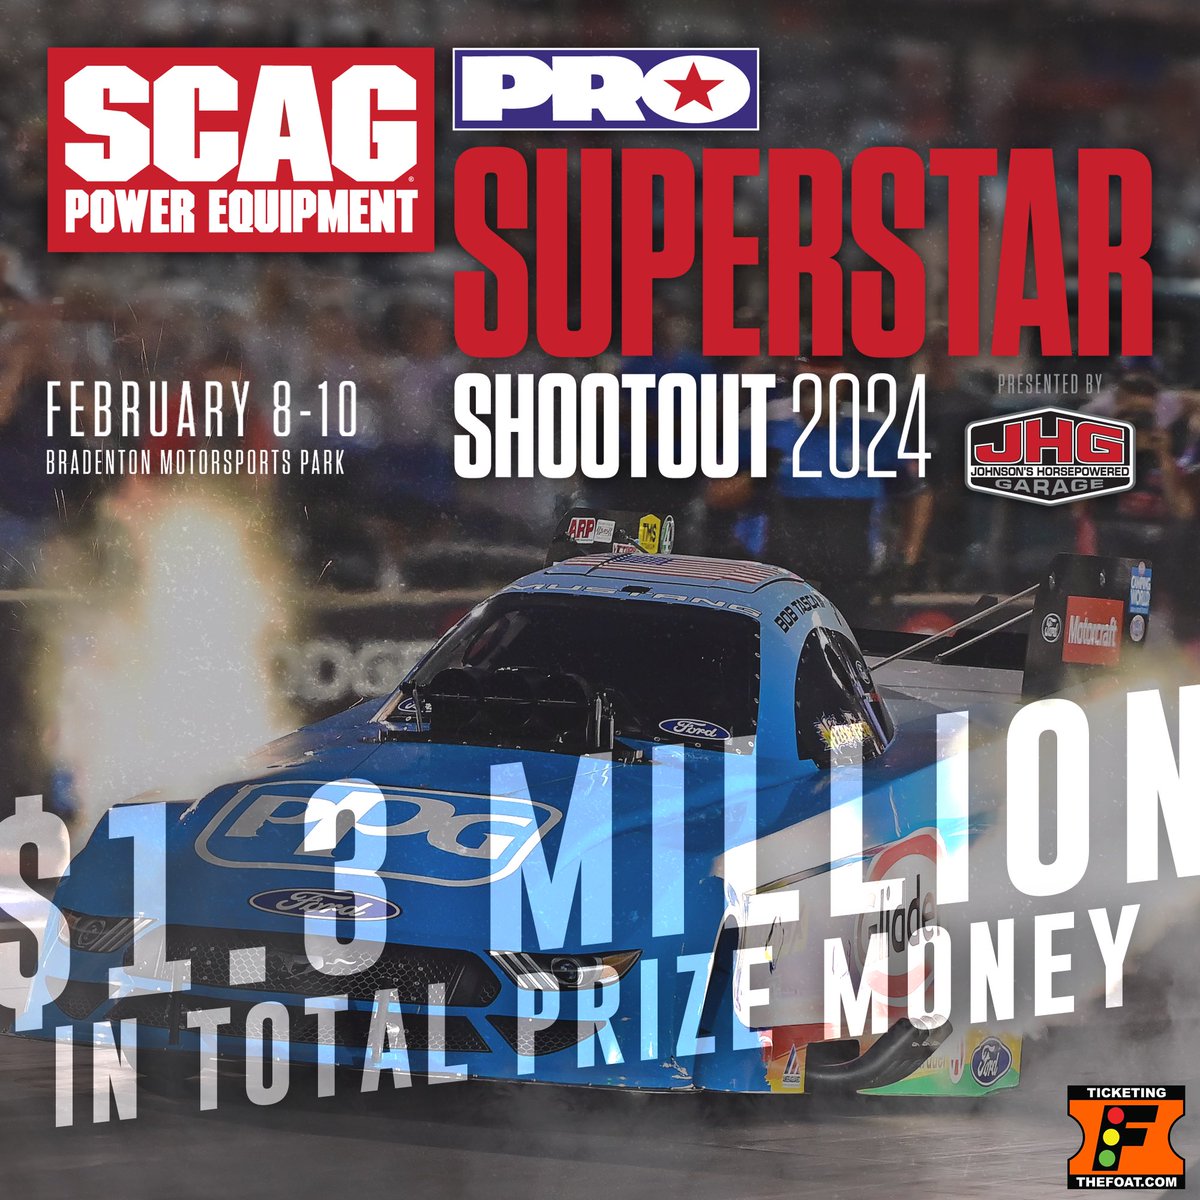 Our team is excited for the #PROonFLO #SuperstarShootout Feb. 8-10, 2024 at Bradenton Motorsports Park. 
Tickets on sale now: bit.ly/scagpro 
Stream live: flosports.link/3KQGS4I